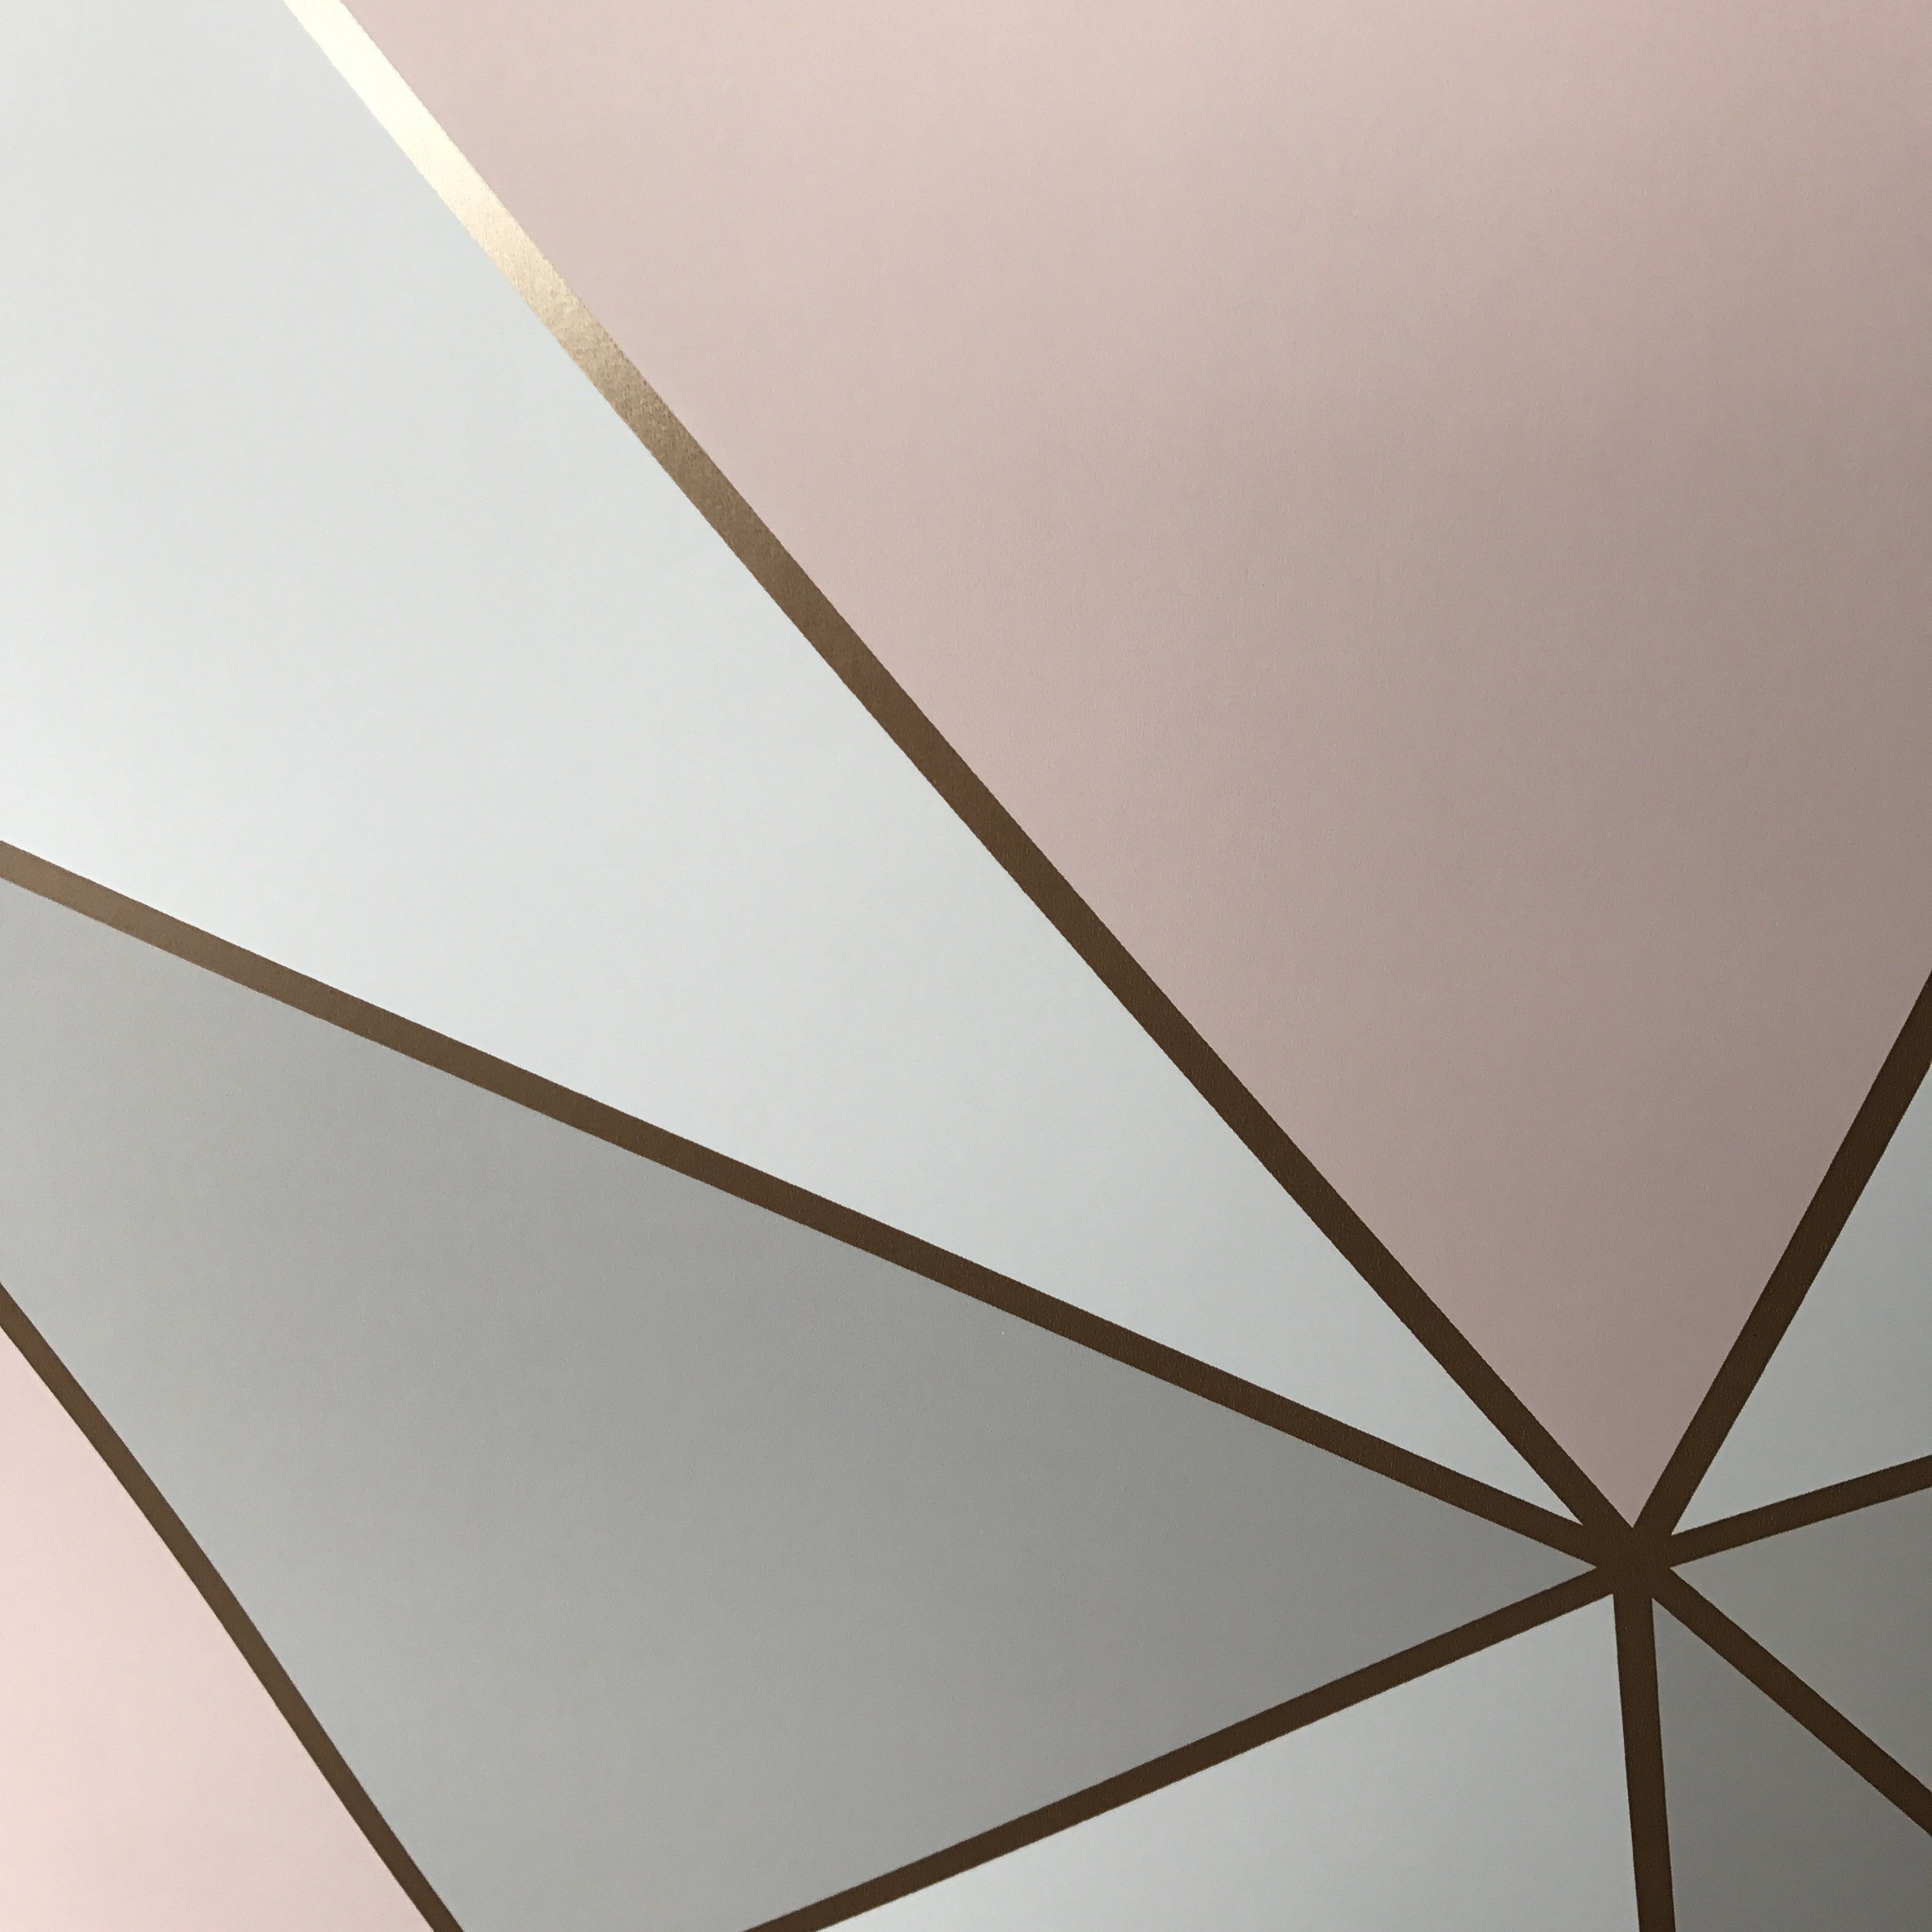 grey and rose gold wallpaper,ceiling,line,beige,material property,architecture